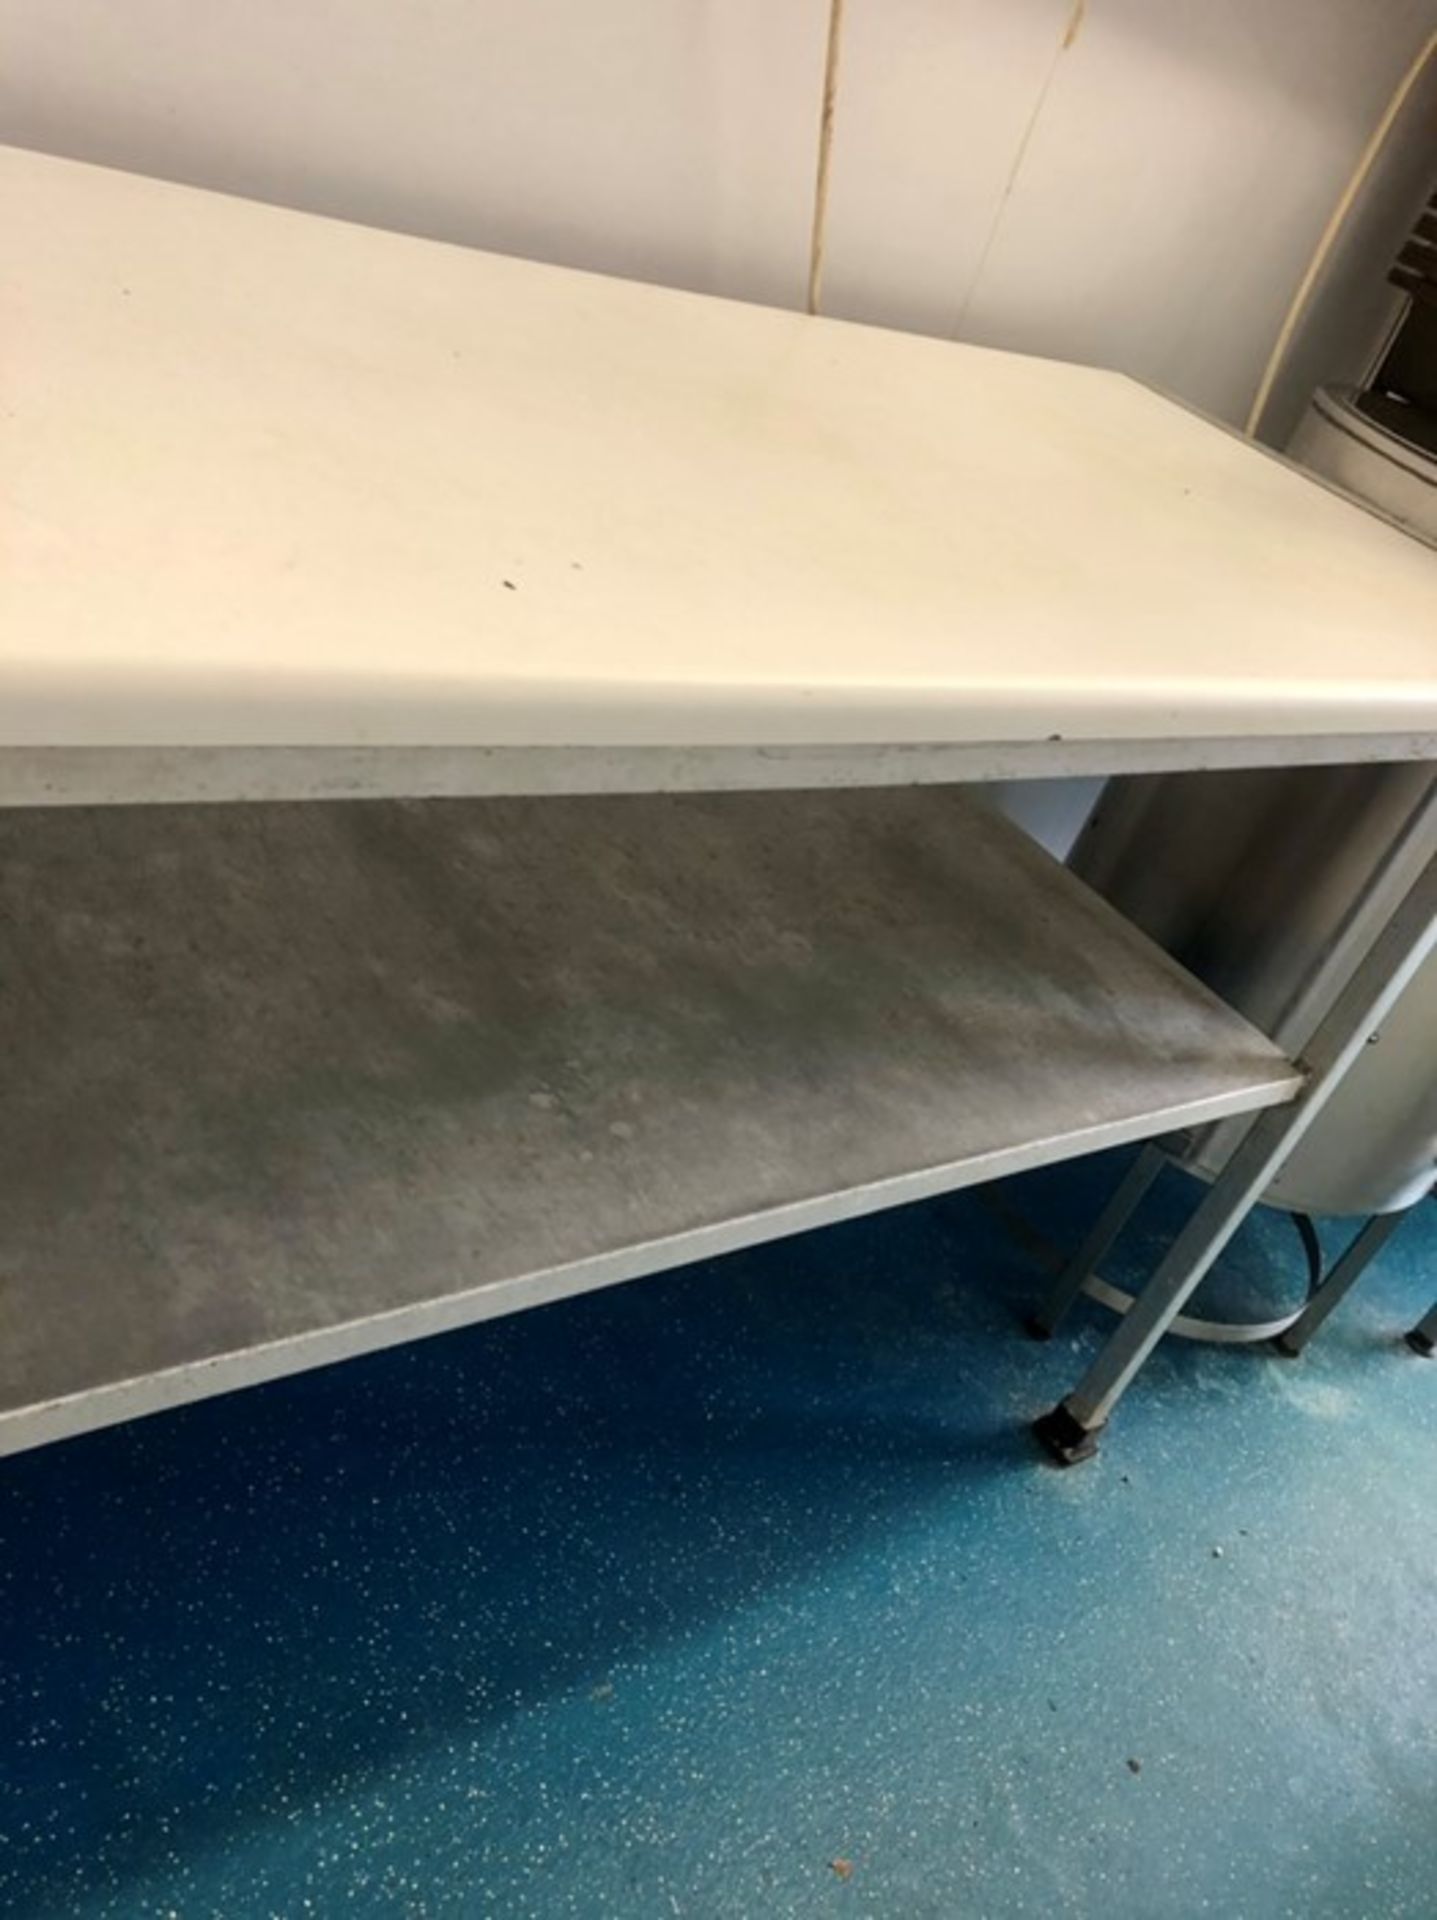 Stainless Steel work food preparation table, 36" x 24" x 34" - Image 3 of 3